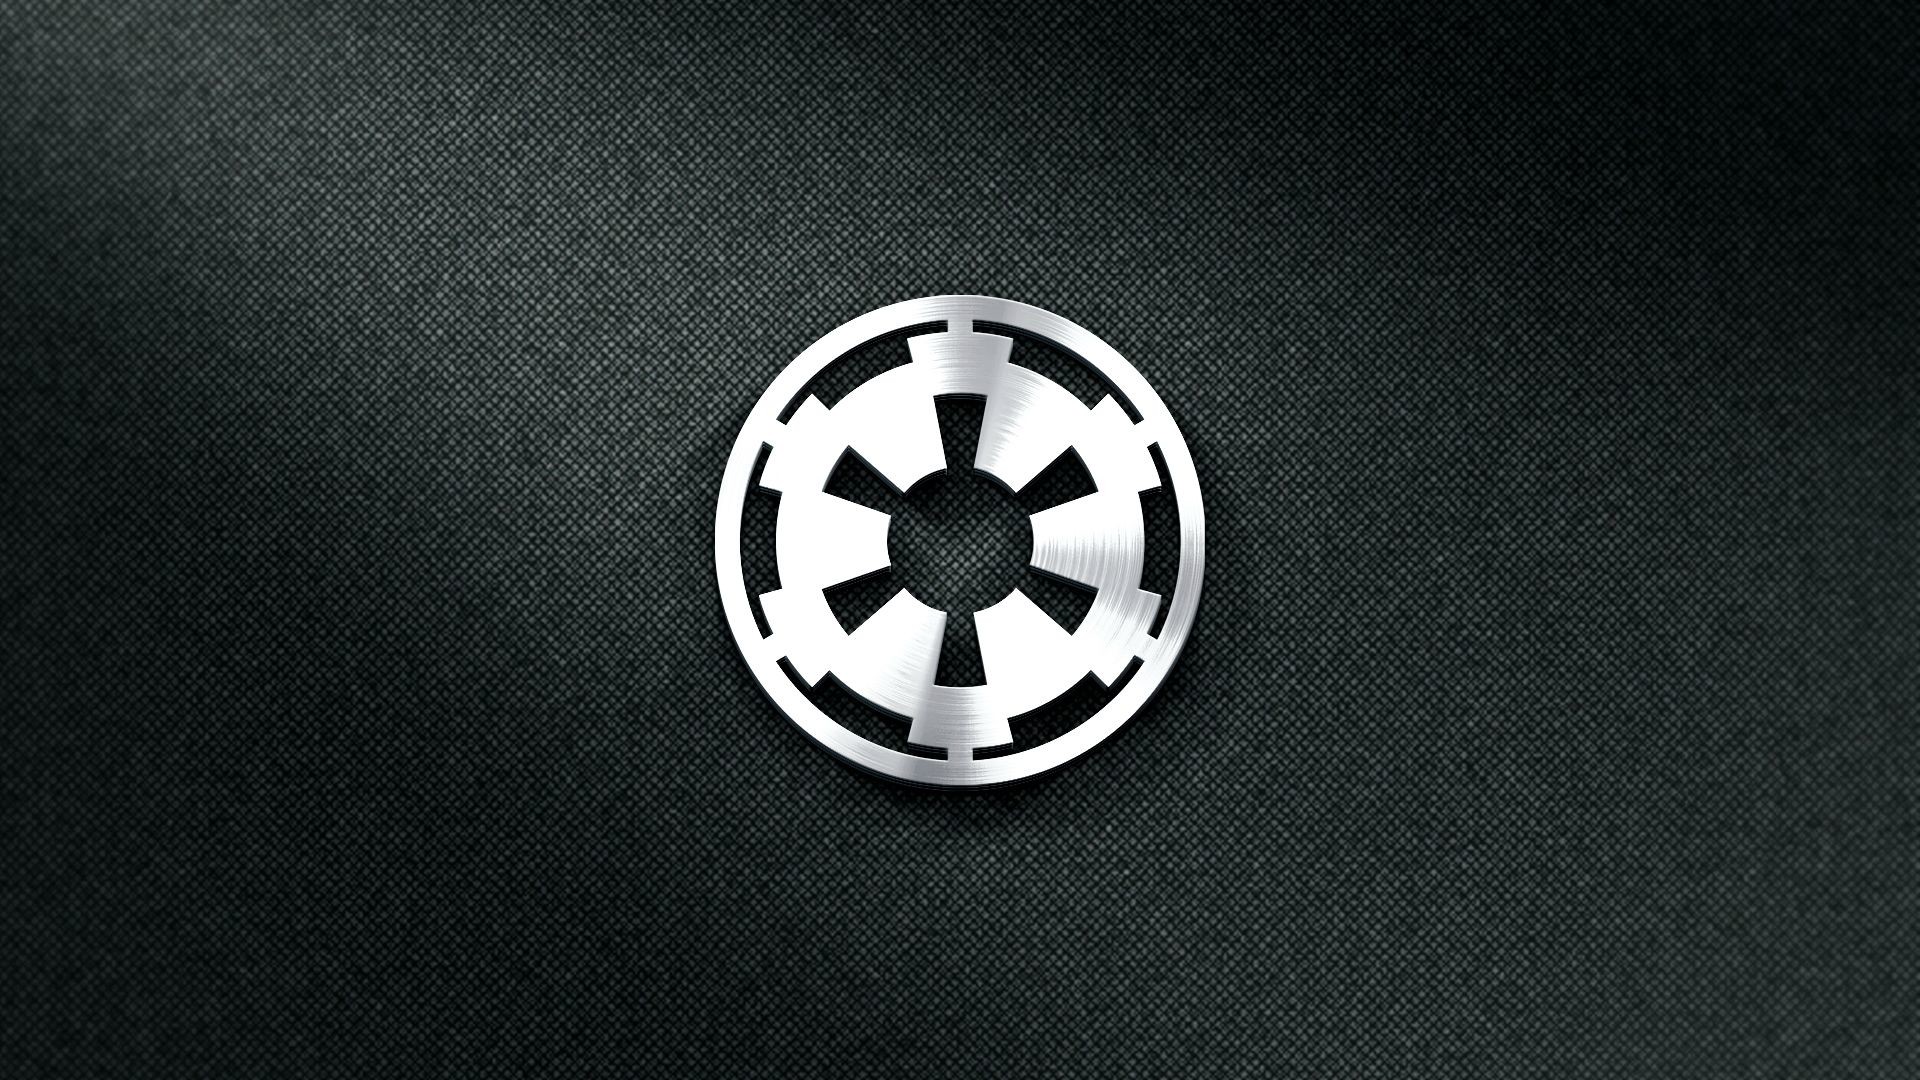 1920x1080 Made another wallpaper for you Imperials out there.